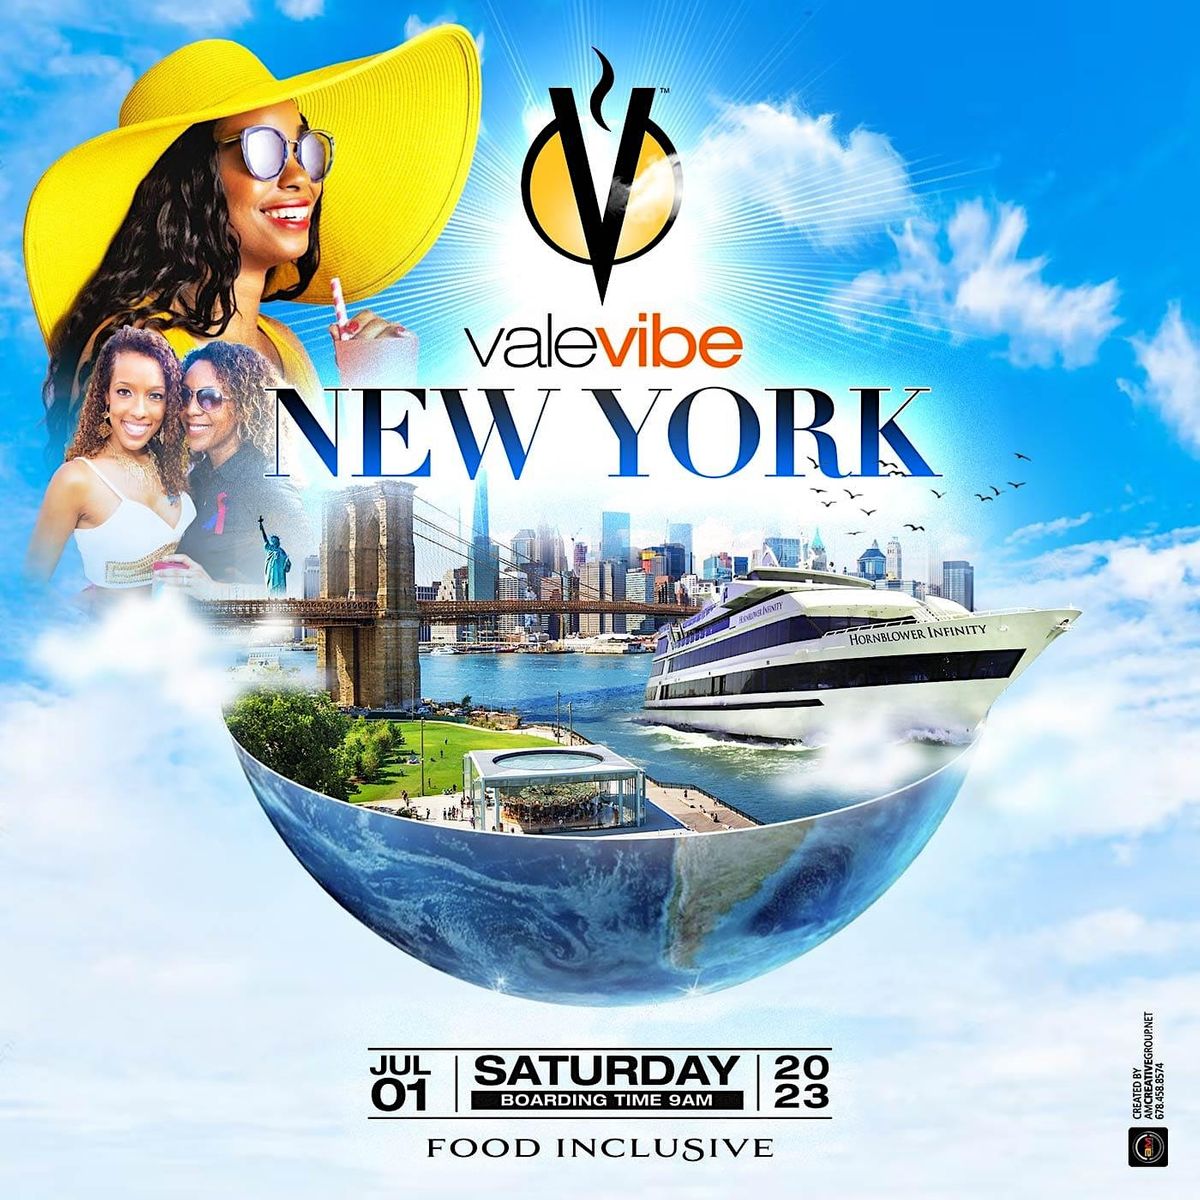 ValeVibe Breakfast Party On D Yacht Food Inclusive Breakfast Party